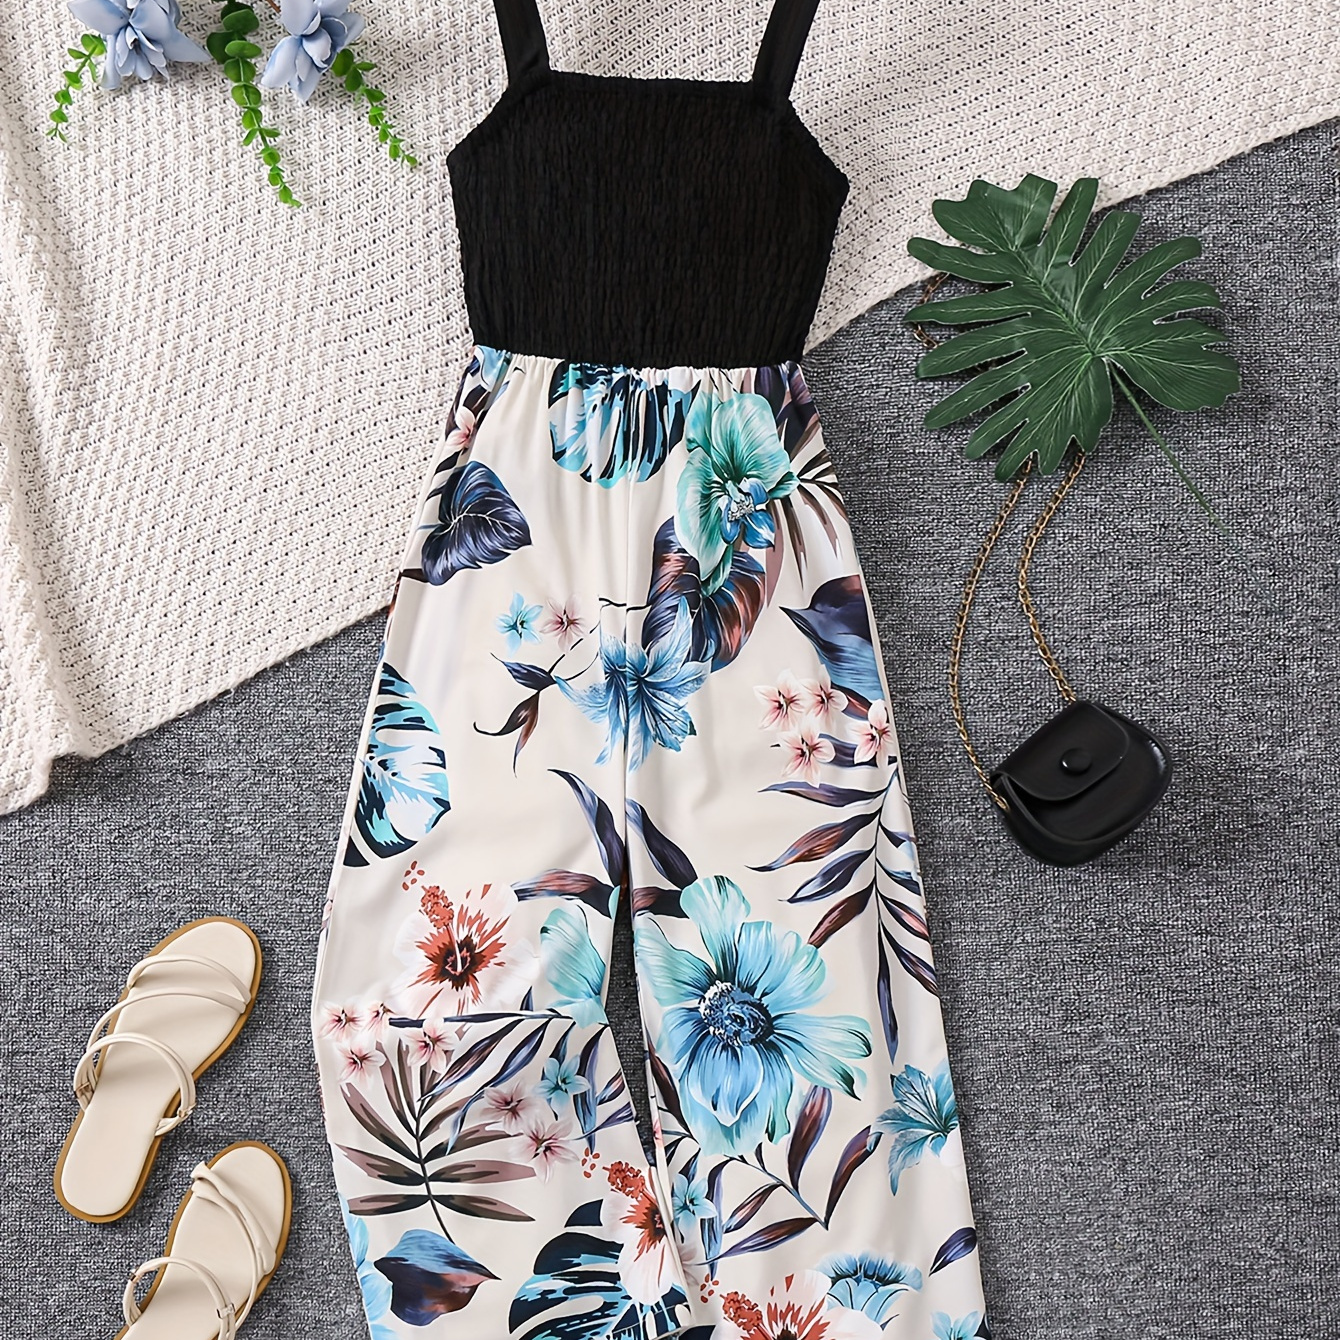 

Elegant Girls Splicing Flower & Plants Graphic Sleeveless Jumpsuit, Wide Leg Romper For Summer Holiday Vacation Gift, Fluid Pants